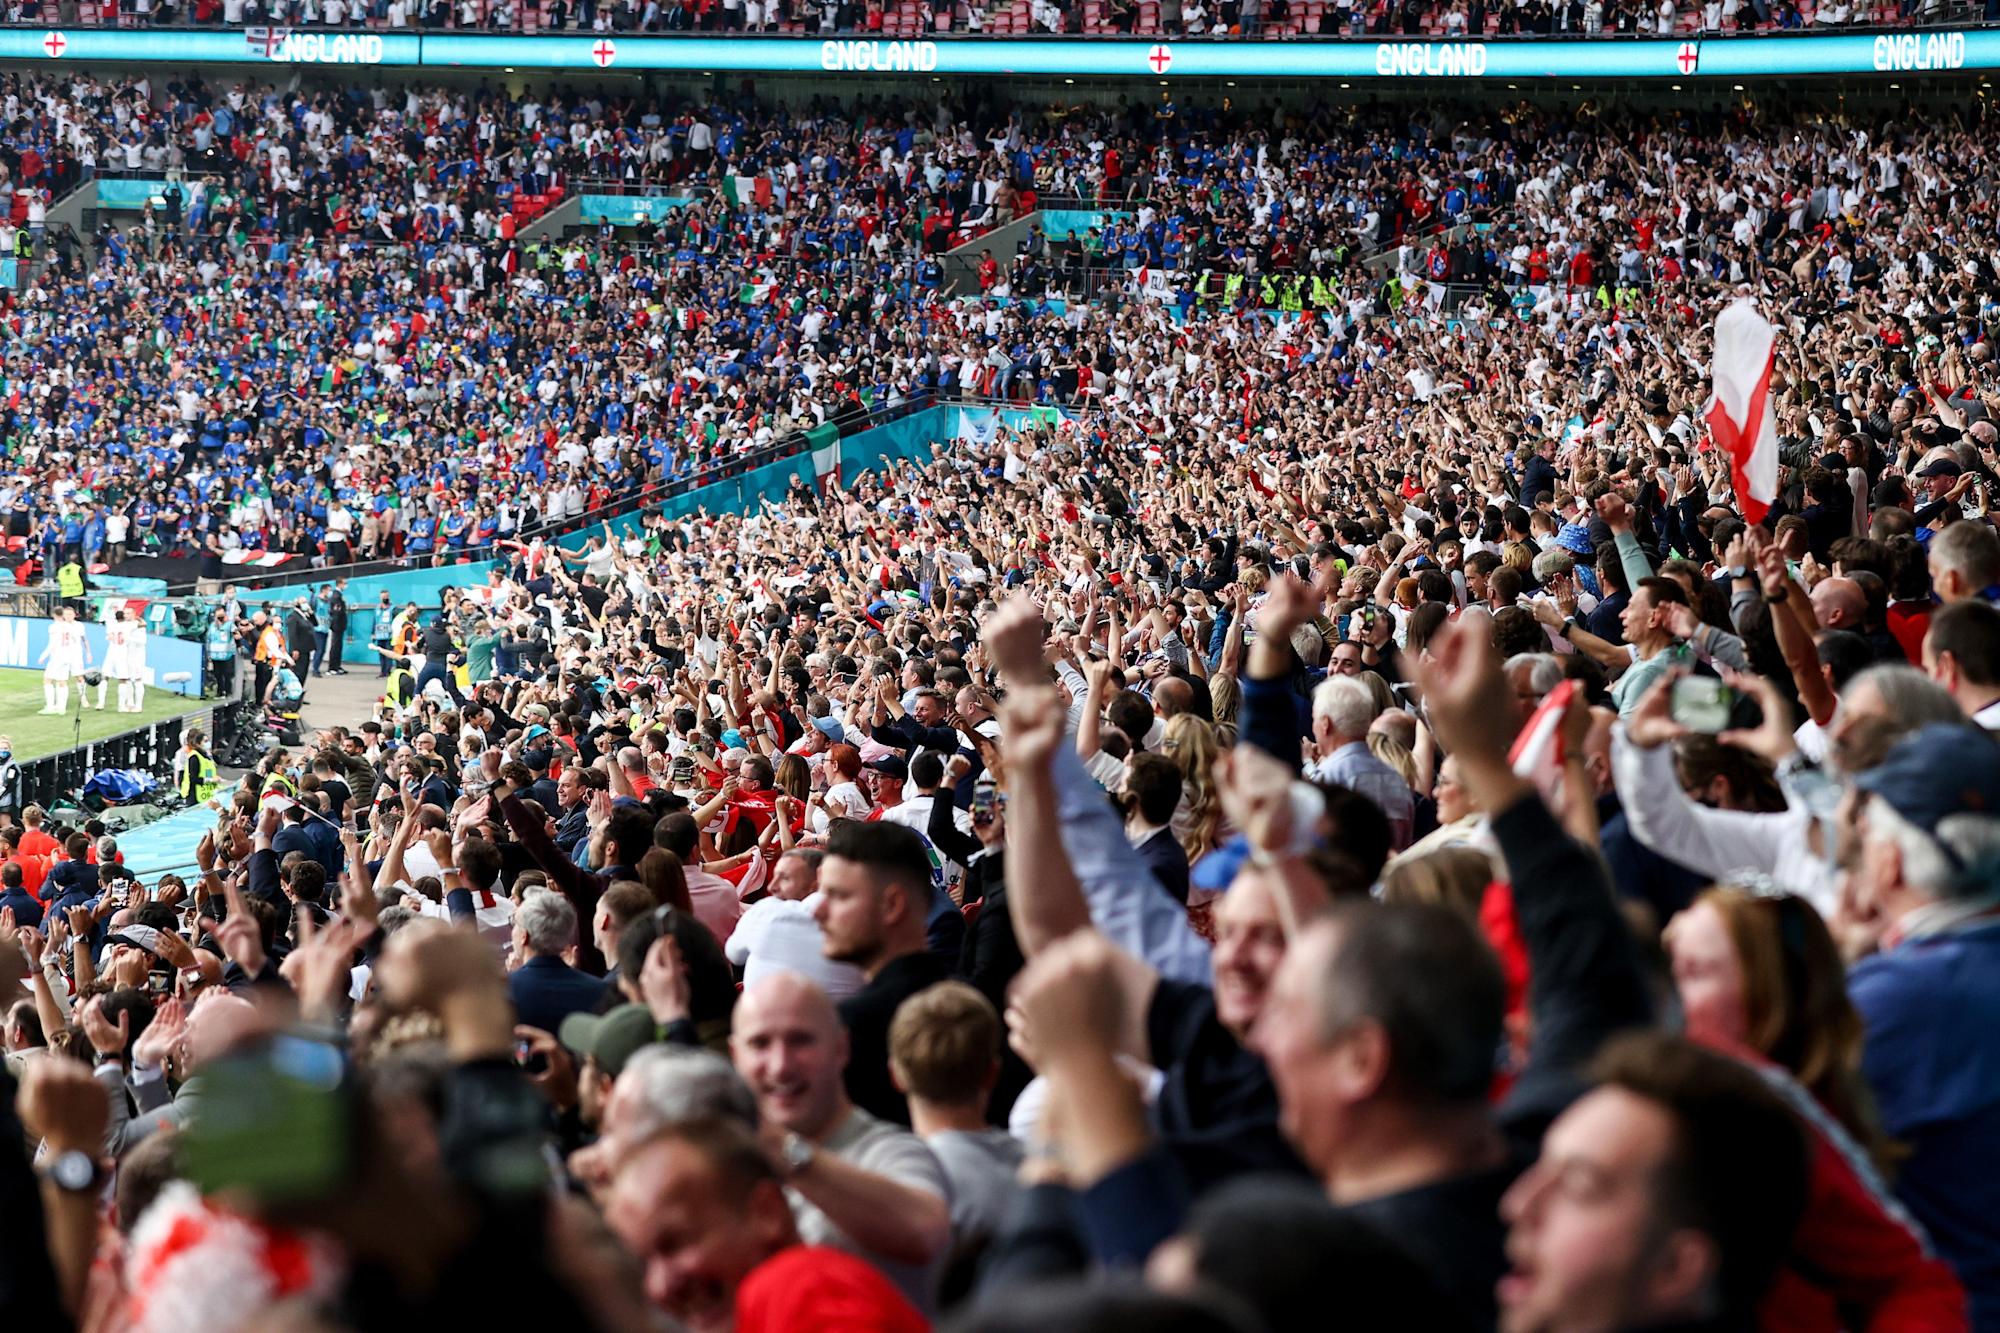 FA pledges full review into Wembley security breach